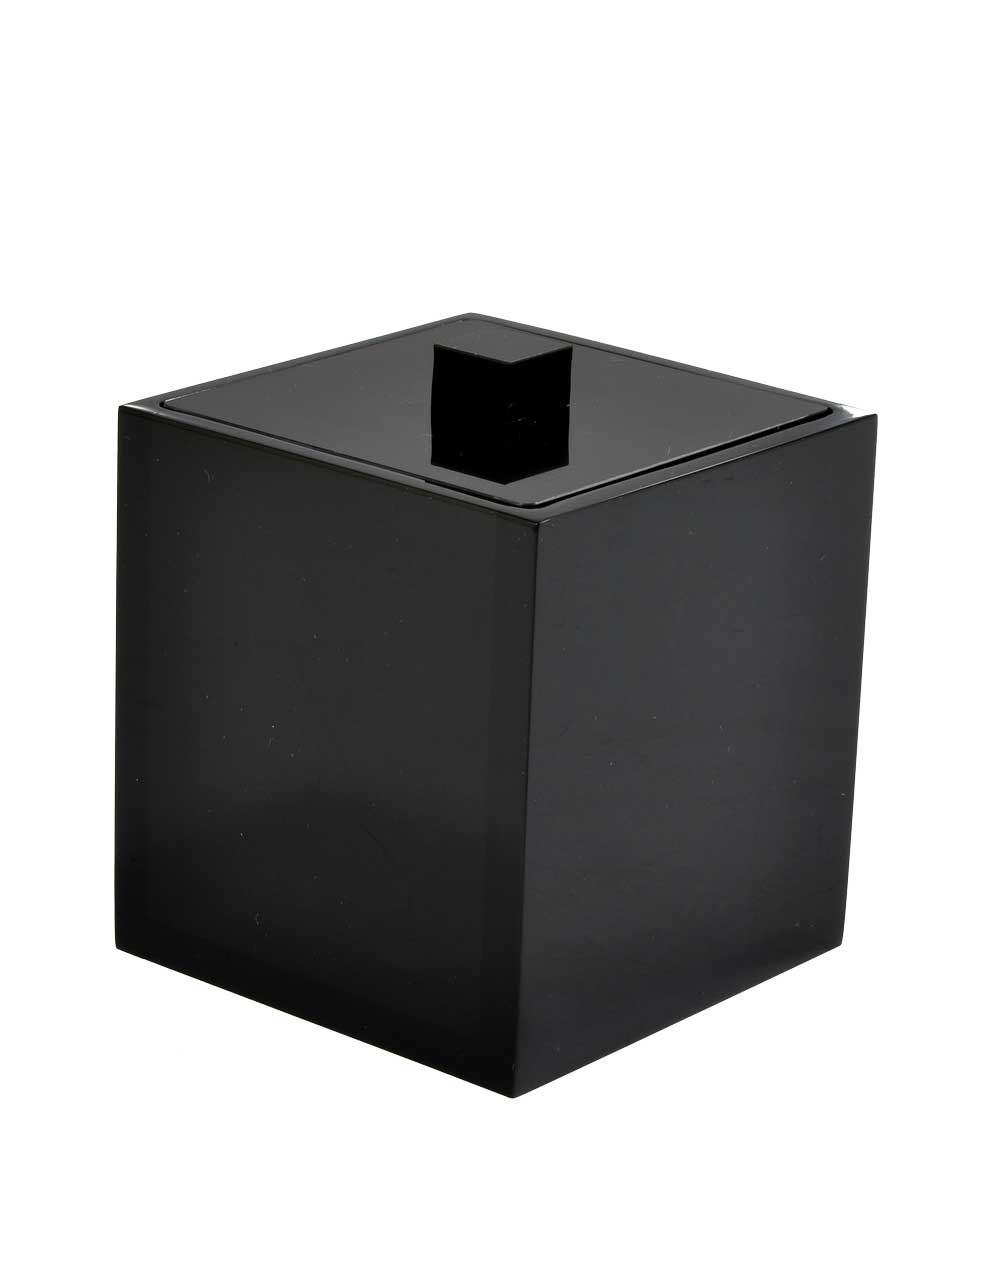 Mike + Ally Ice Black Lucite Bathroom Accessories